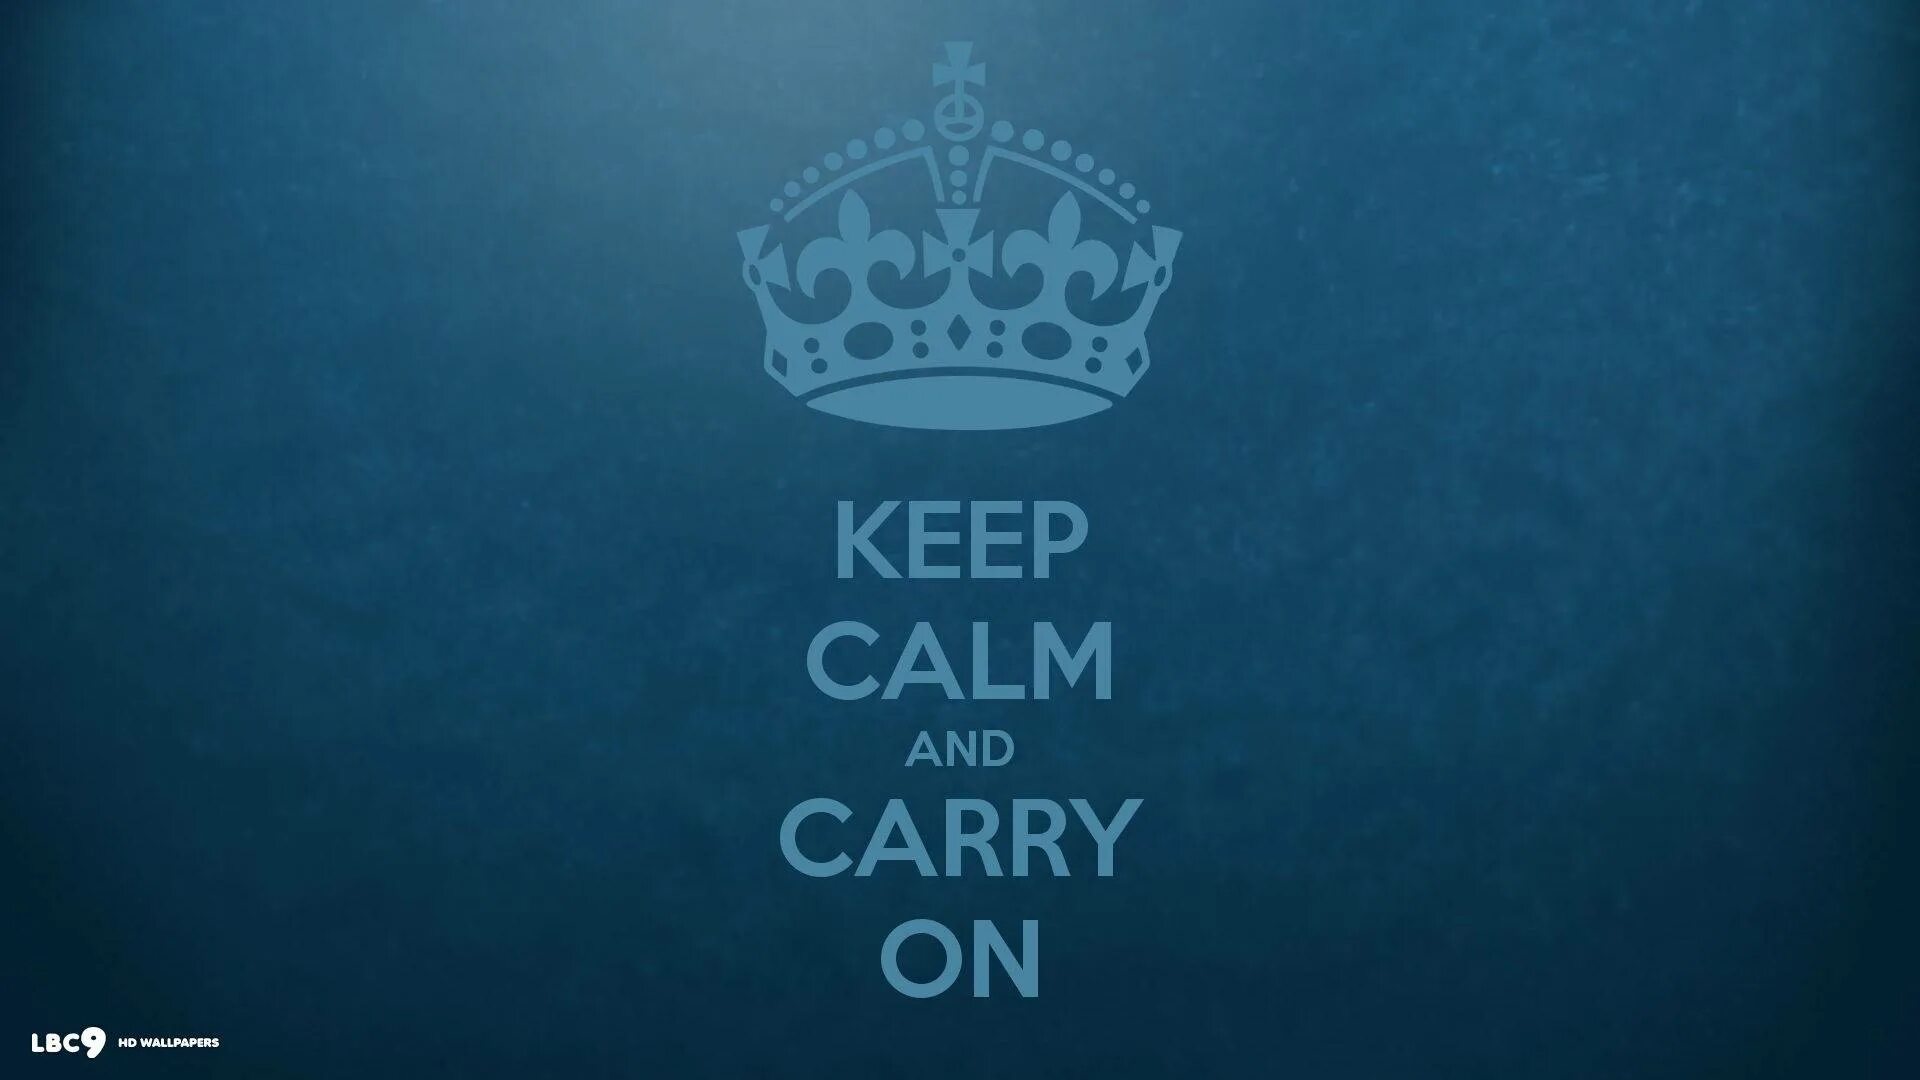 To keep there well being. Keep Calm and carry. Keep Calm and carry on. Обои keep Calm. Обои сохраняй спокойствие.